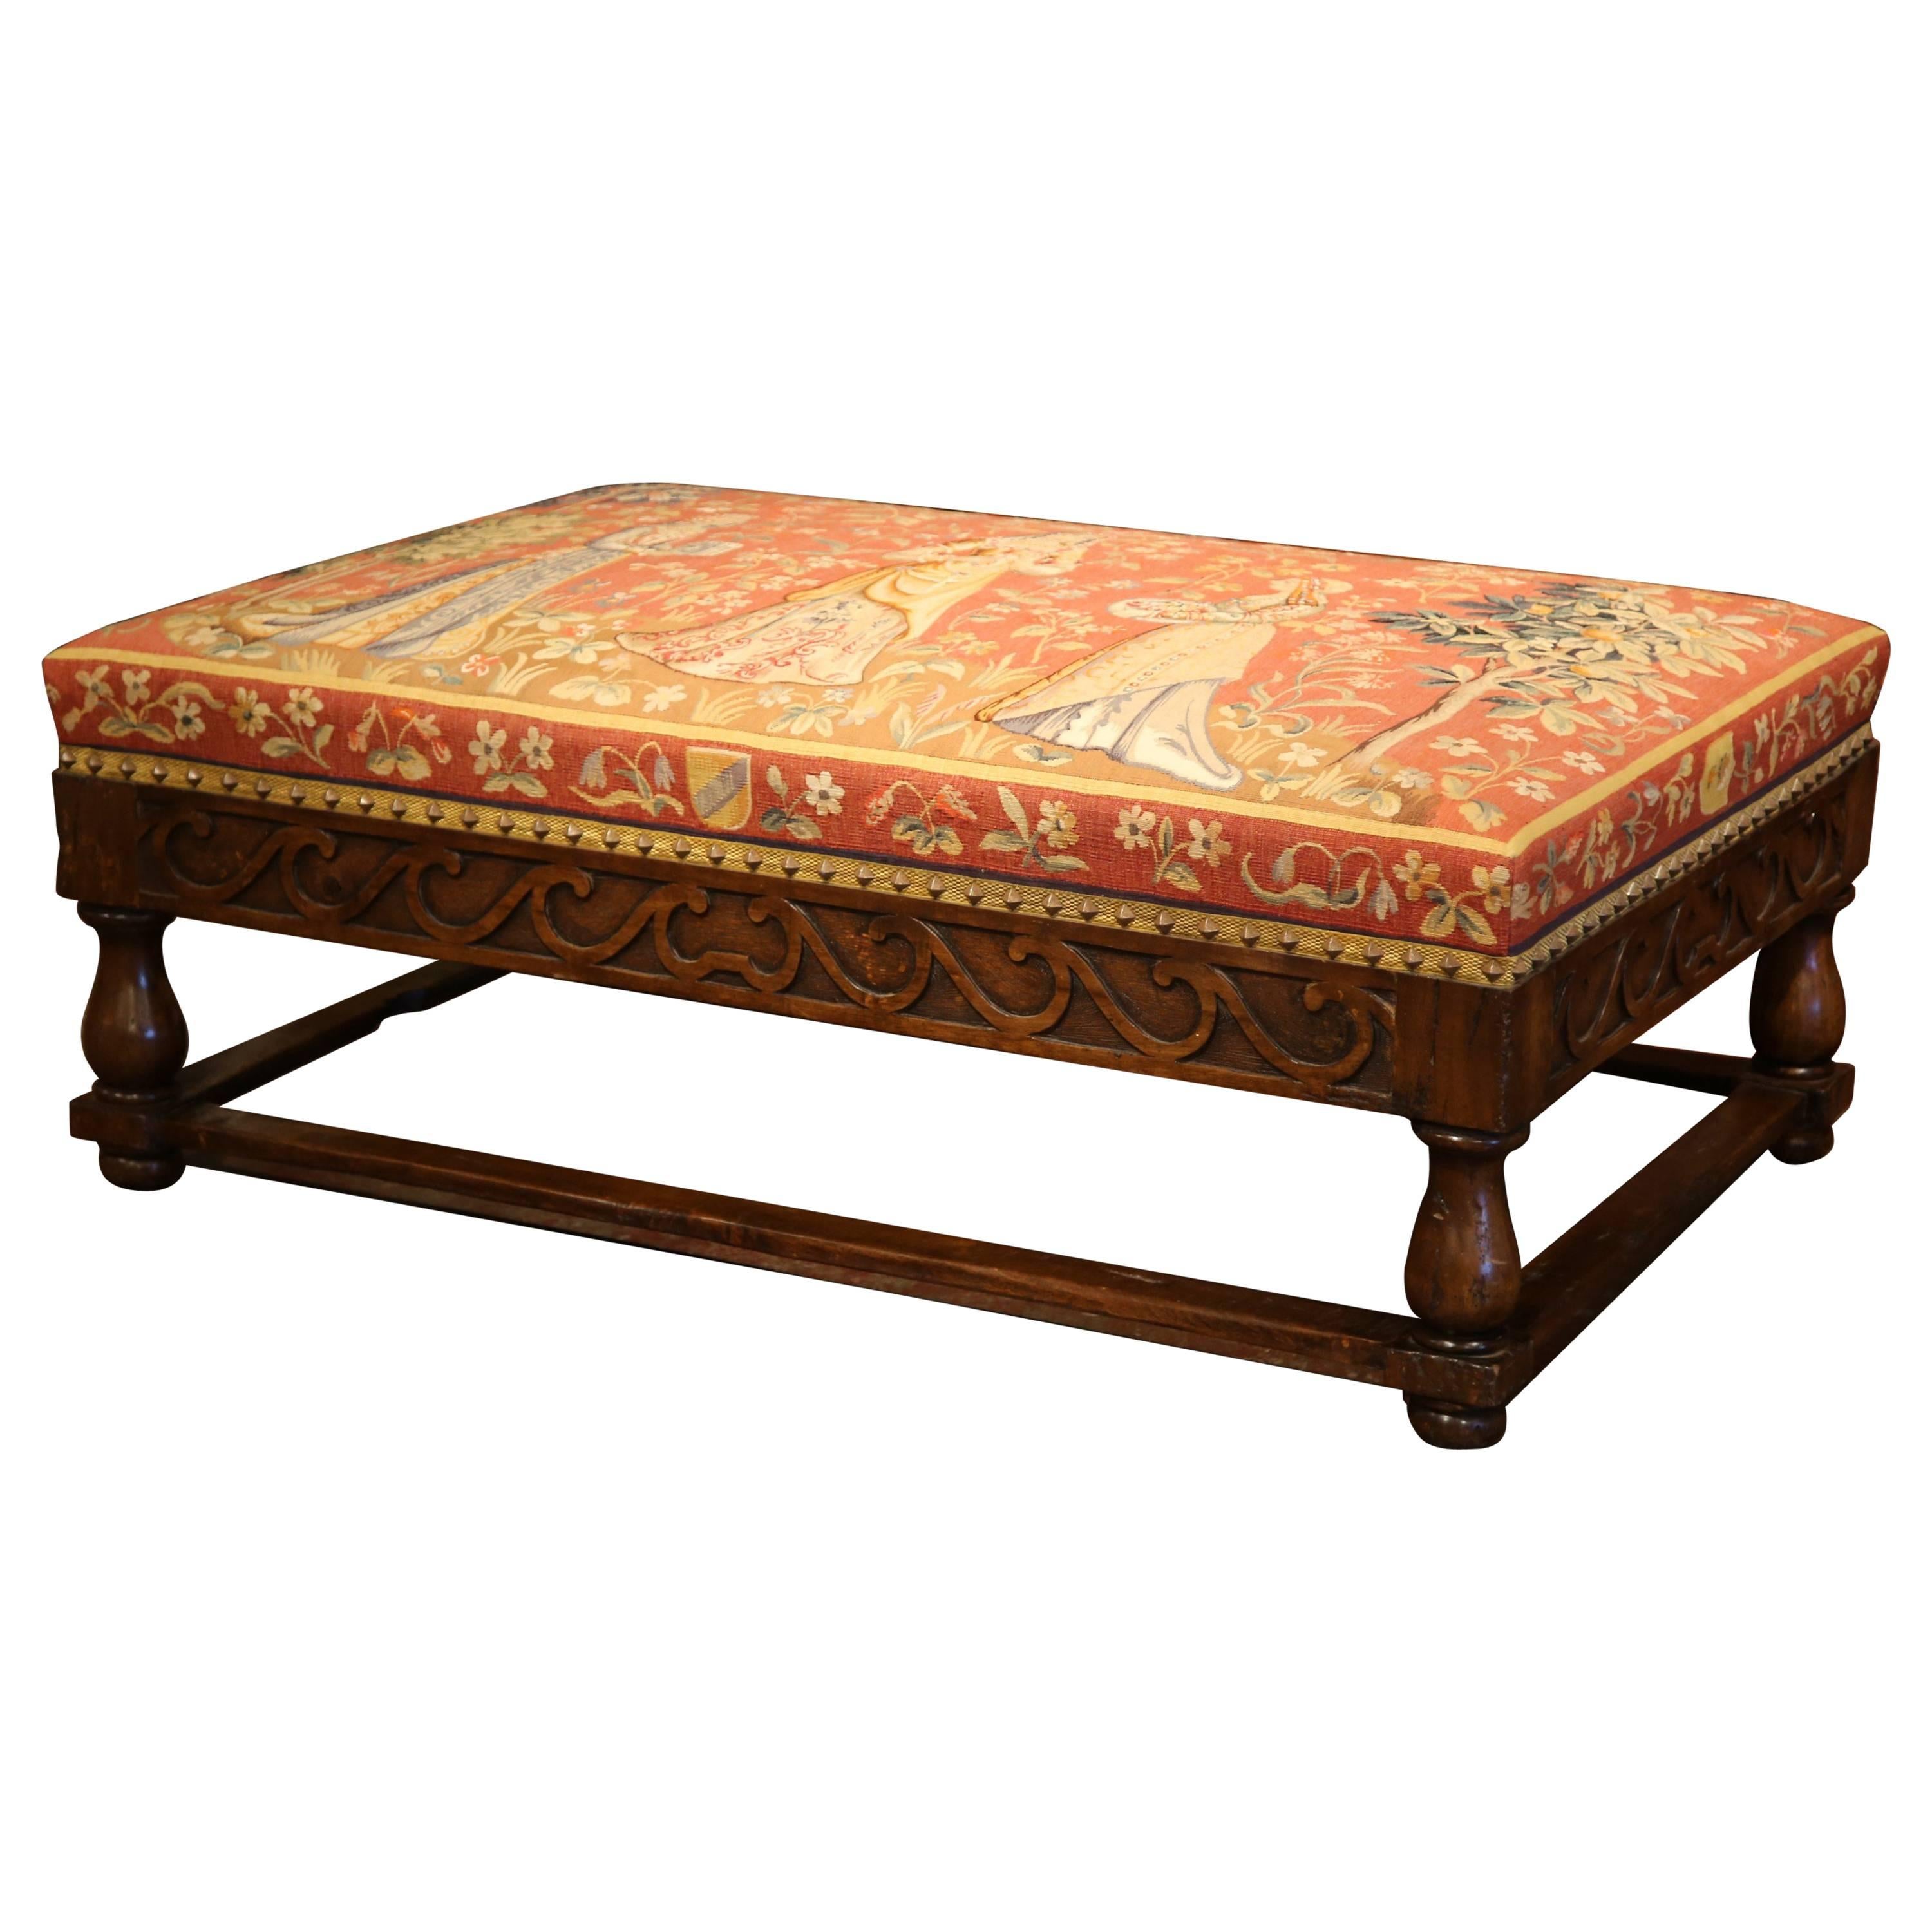 Large, 19th Century French Carved Walnut Ottoman with Aubusson Tapestry